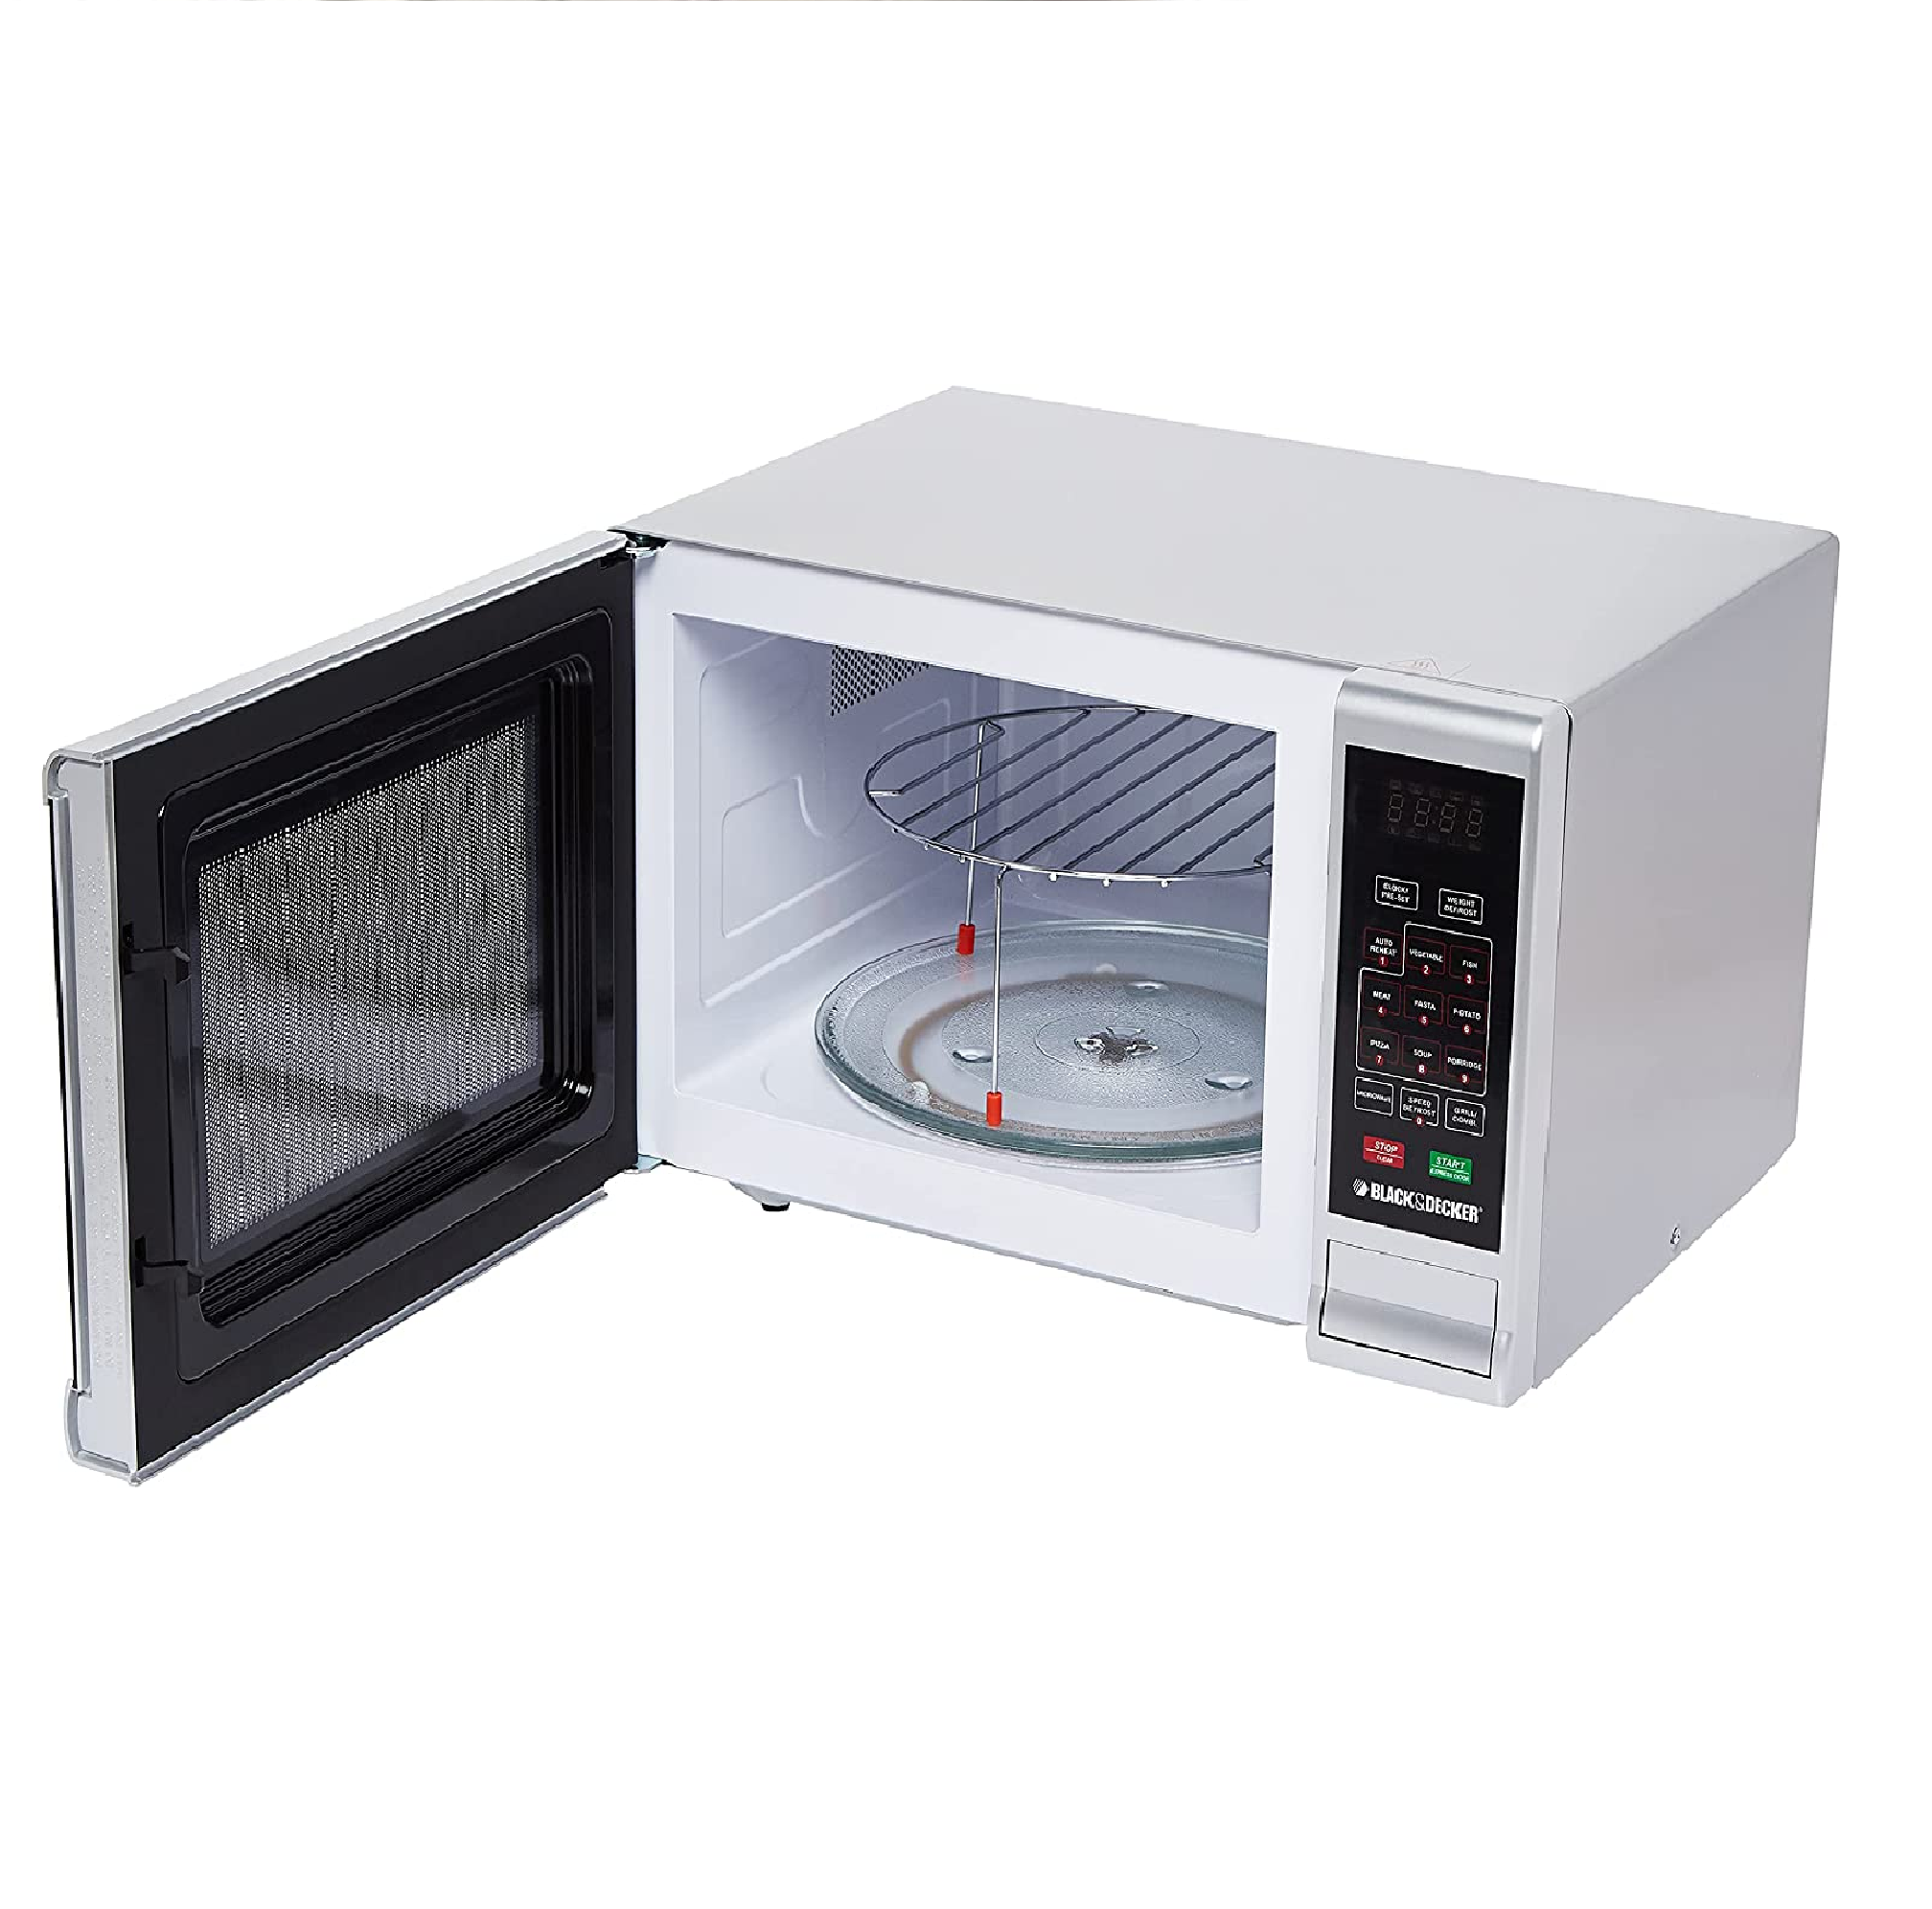 Black+Decker Microwave Oven with Grill 30 L, Silver - MZ3000PG